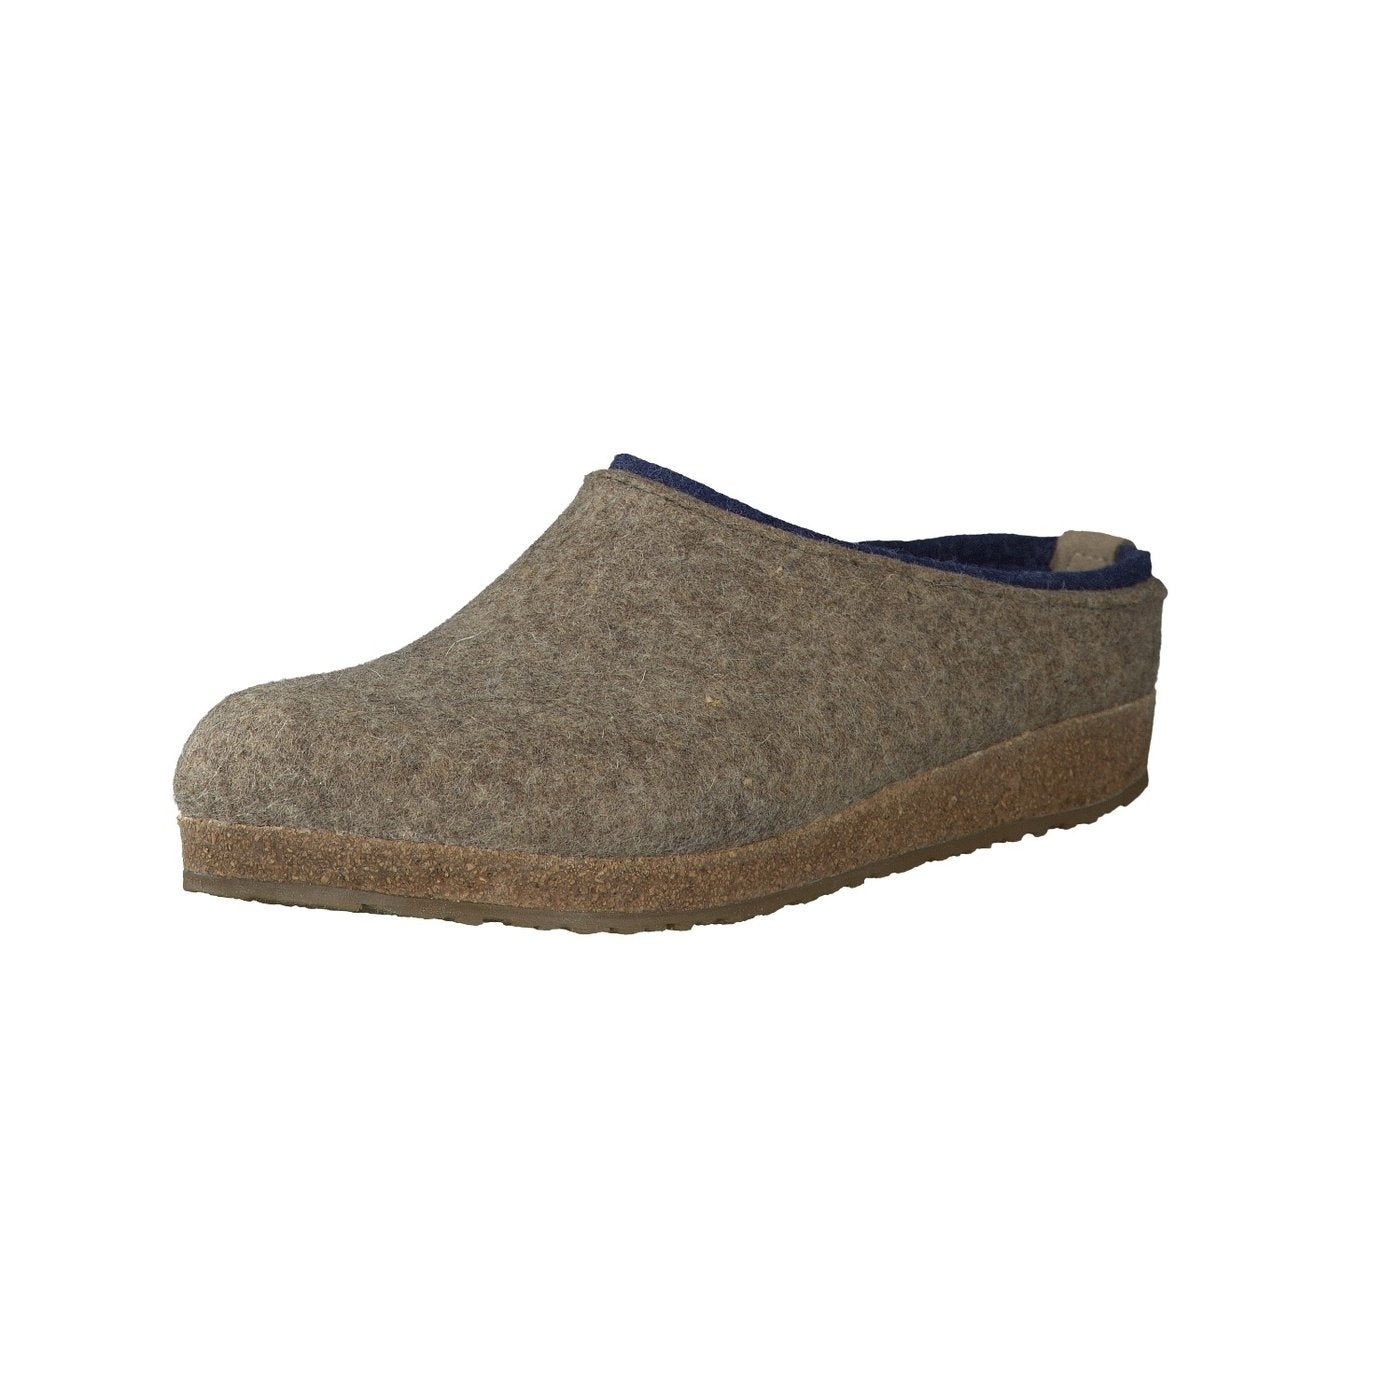 Haflinger Grizzly Kris Slippers Clogs Mules Wool Felt Scuffs Slip On House Brown - Bartel-Shop